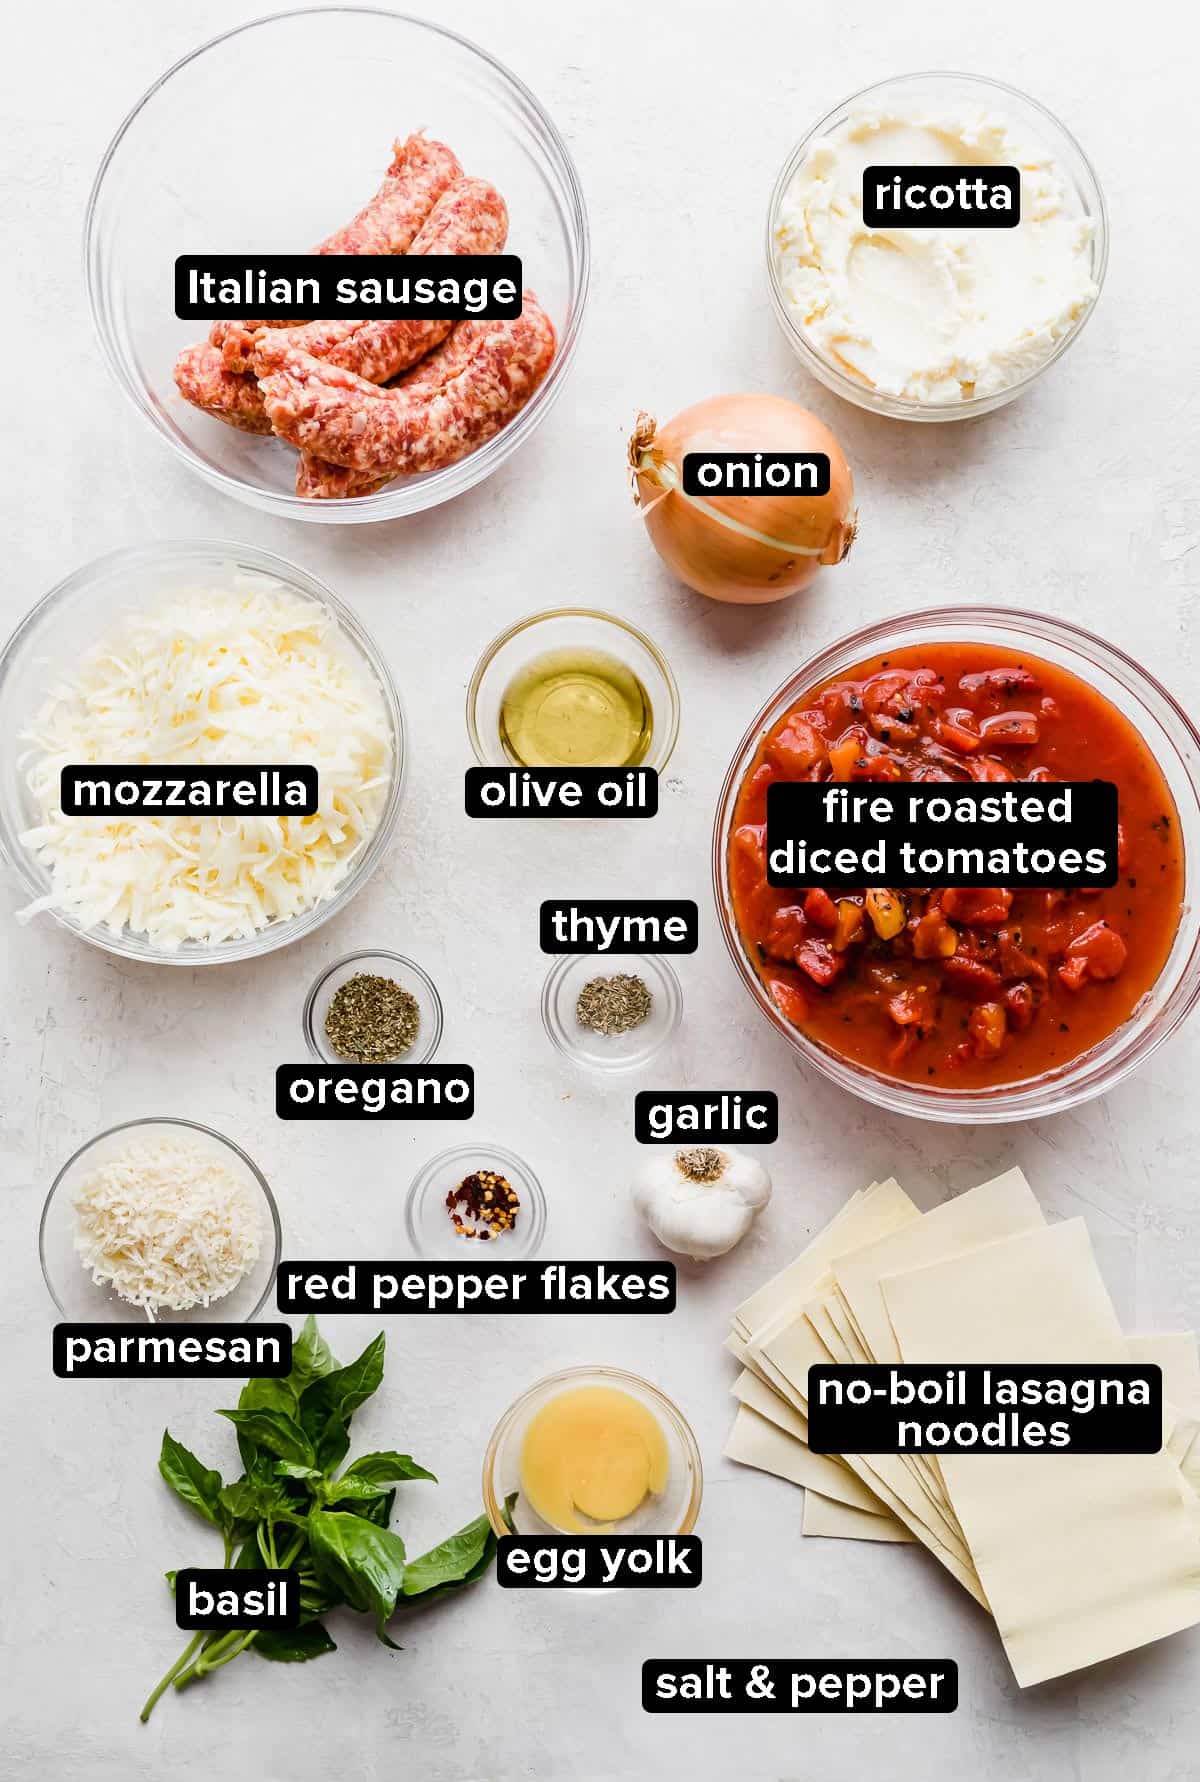 Cast Iron Skillet Lasagna ingredients laid out on a gray background.